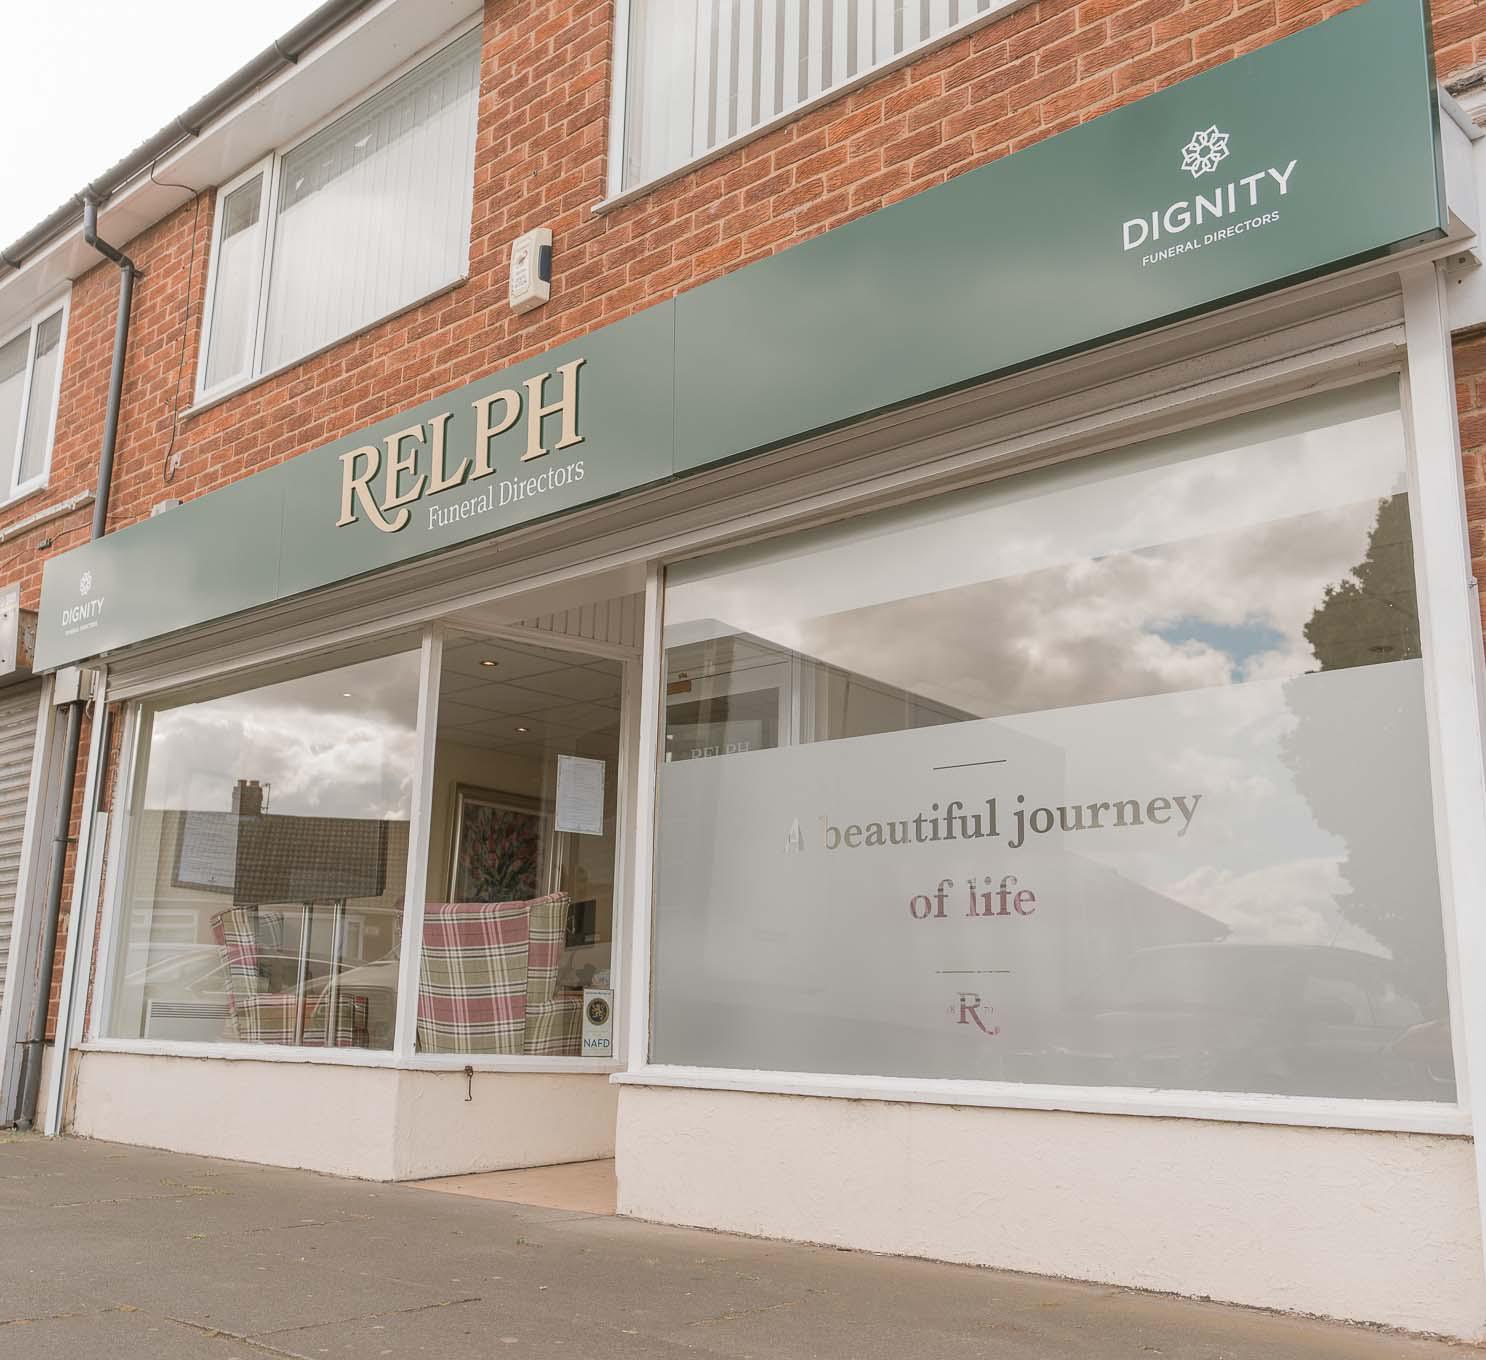 Relph Funeral Home in Stockton on Tees Relph Funeral Directors Stockton On Tees 01642 424836